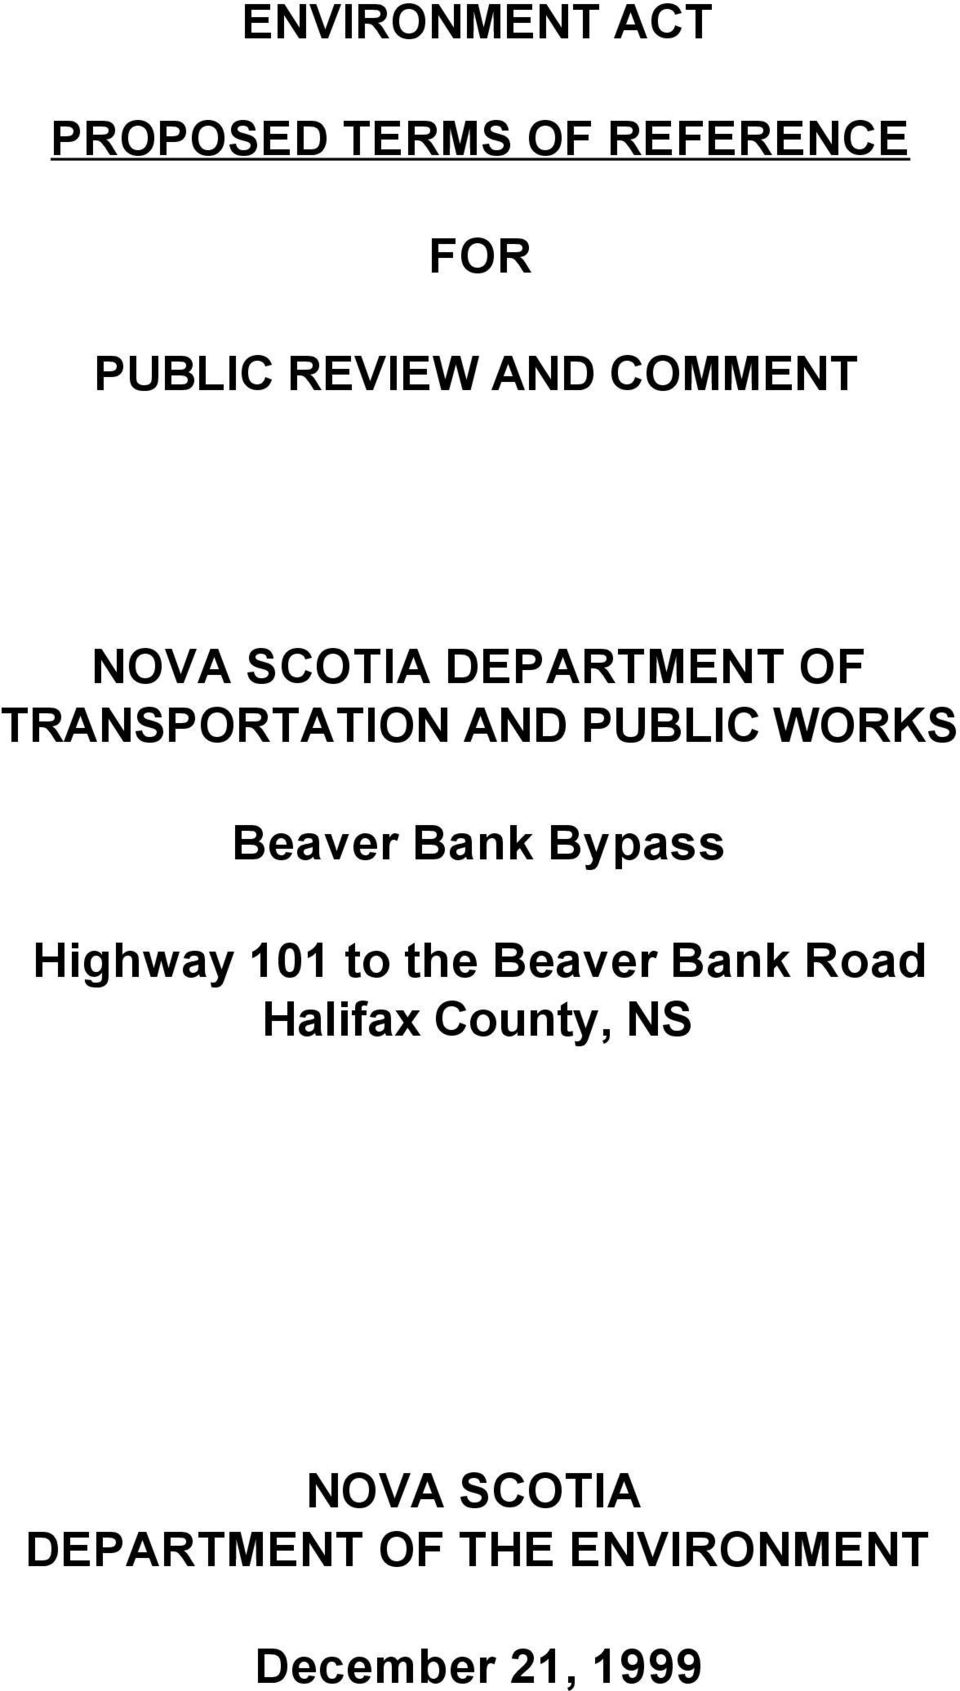 Beaver Bank Bypass Highway 101 to the Beaver Bank Road Halifax